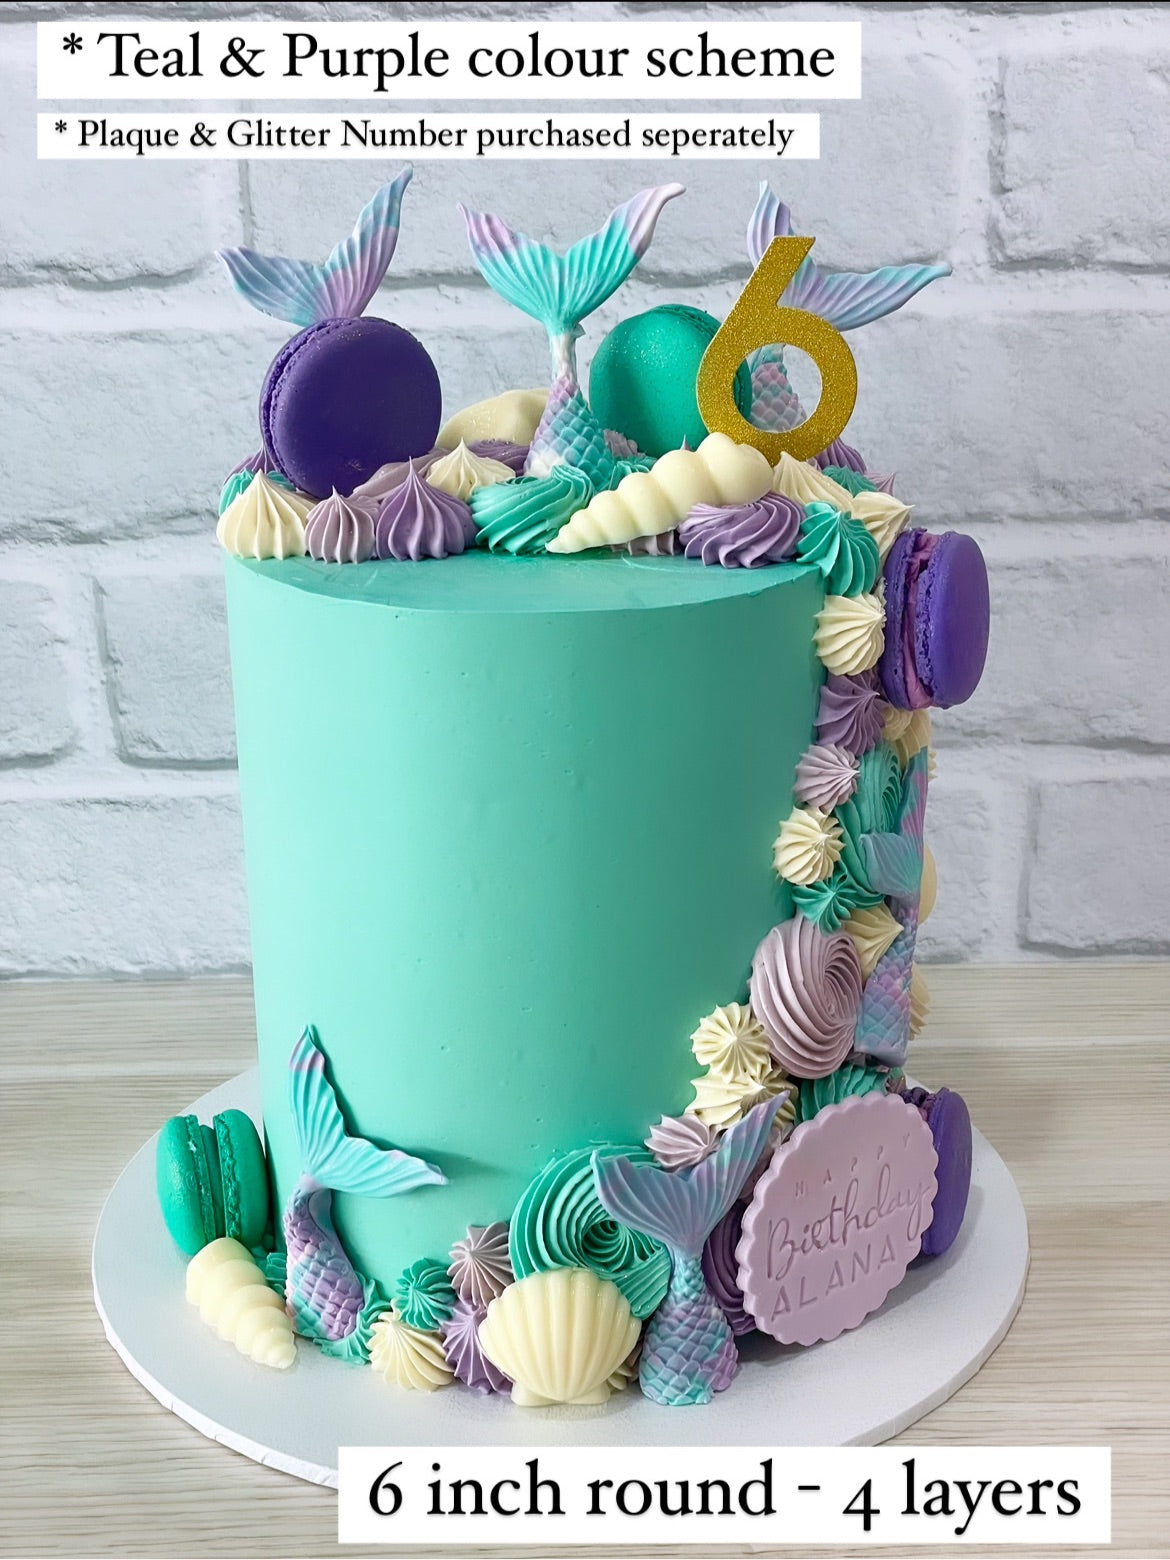 15 Mesmerizing Mermaid Cakes That You Will Love - Find Your Cake Inspiration